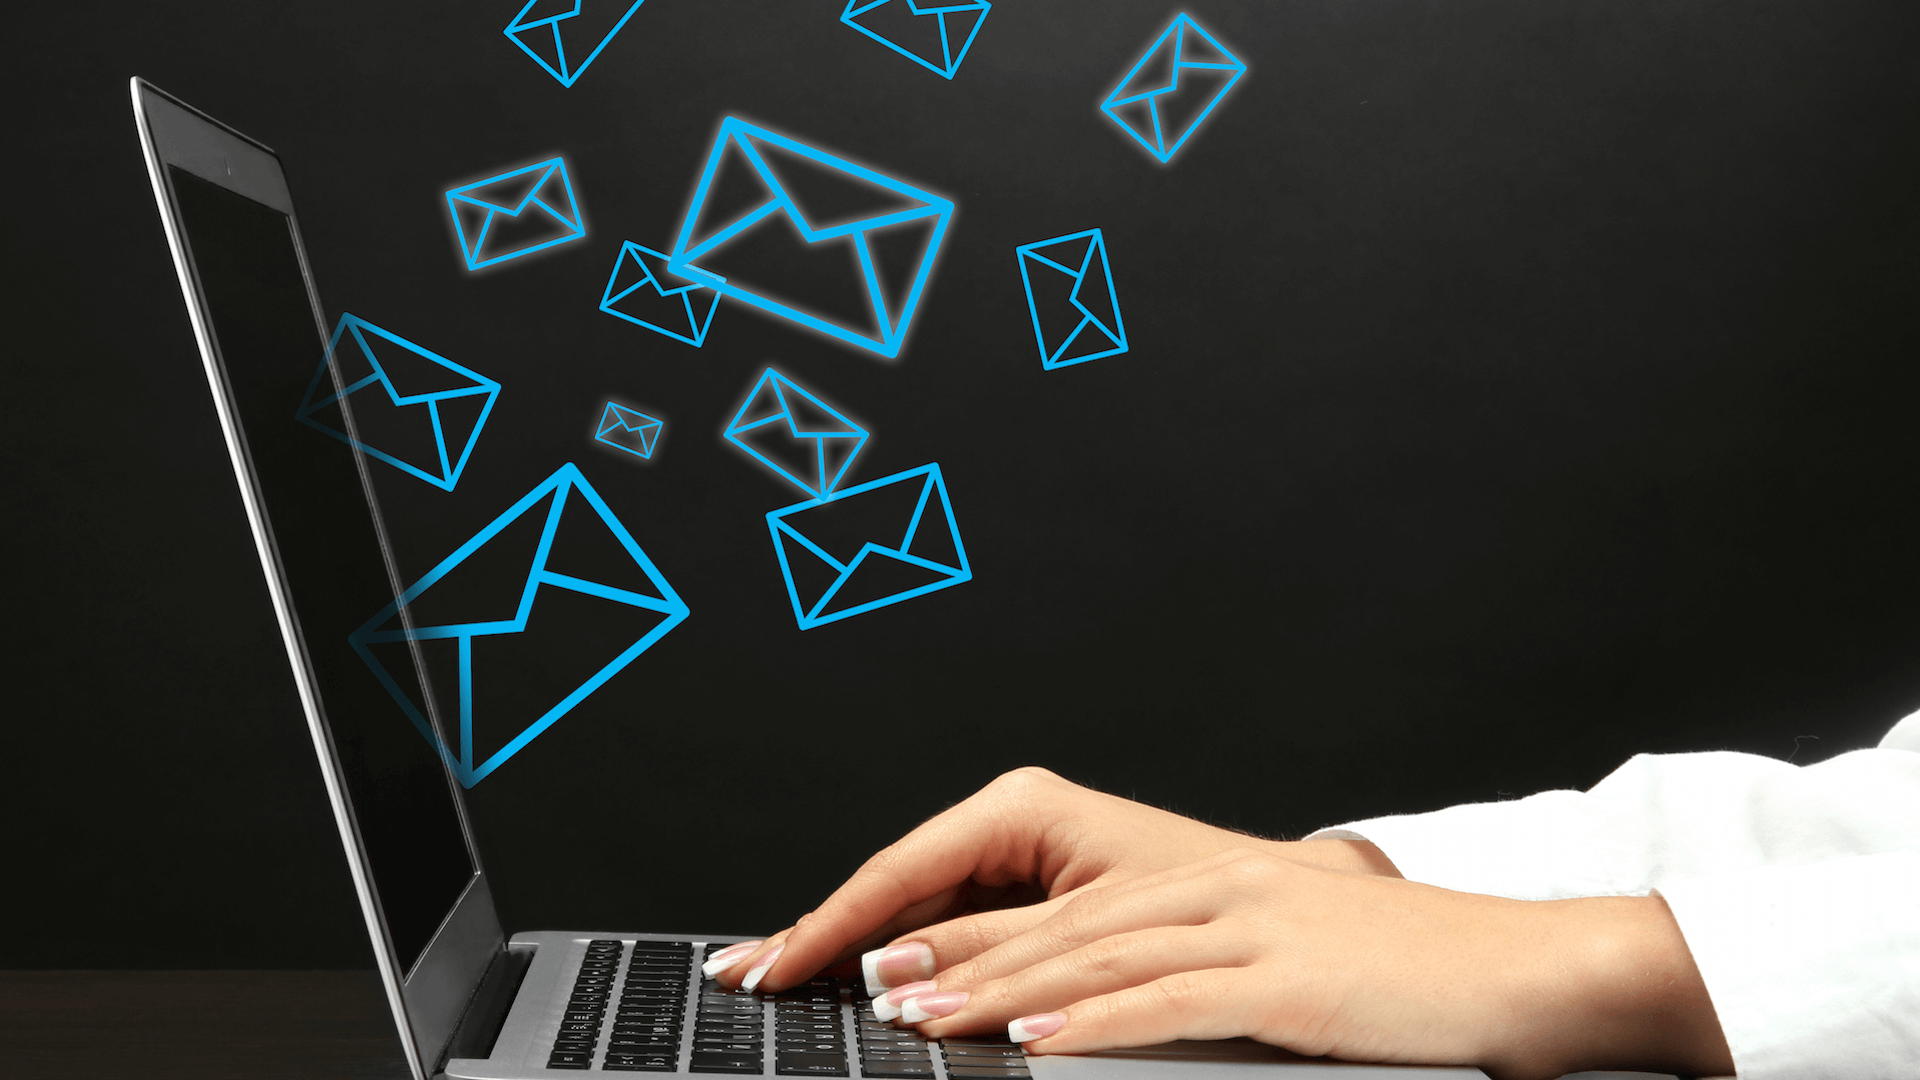 Boost Your Business with Powerful Email Marketing Software, Top Tips 4 U